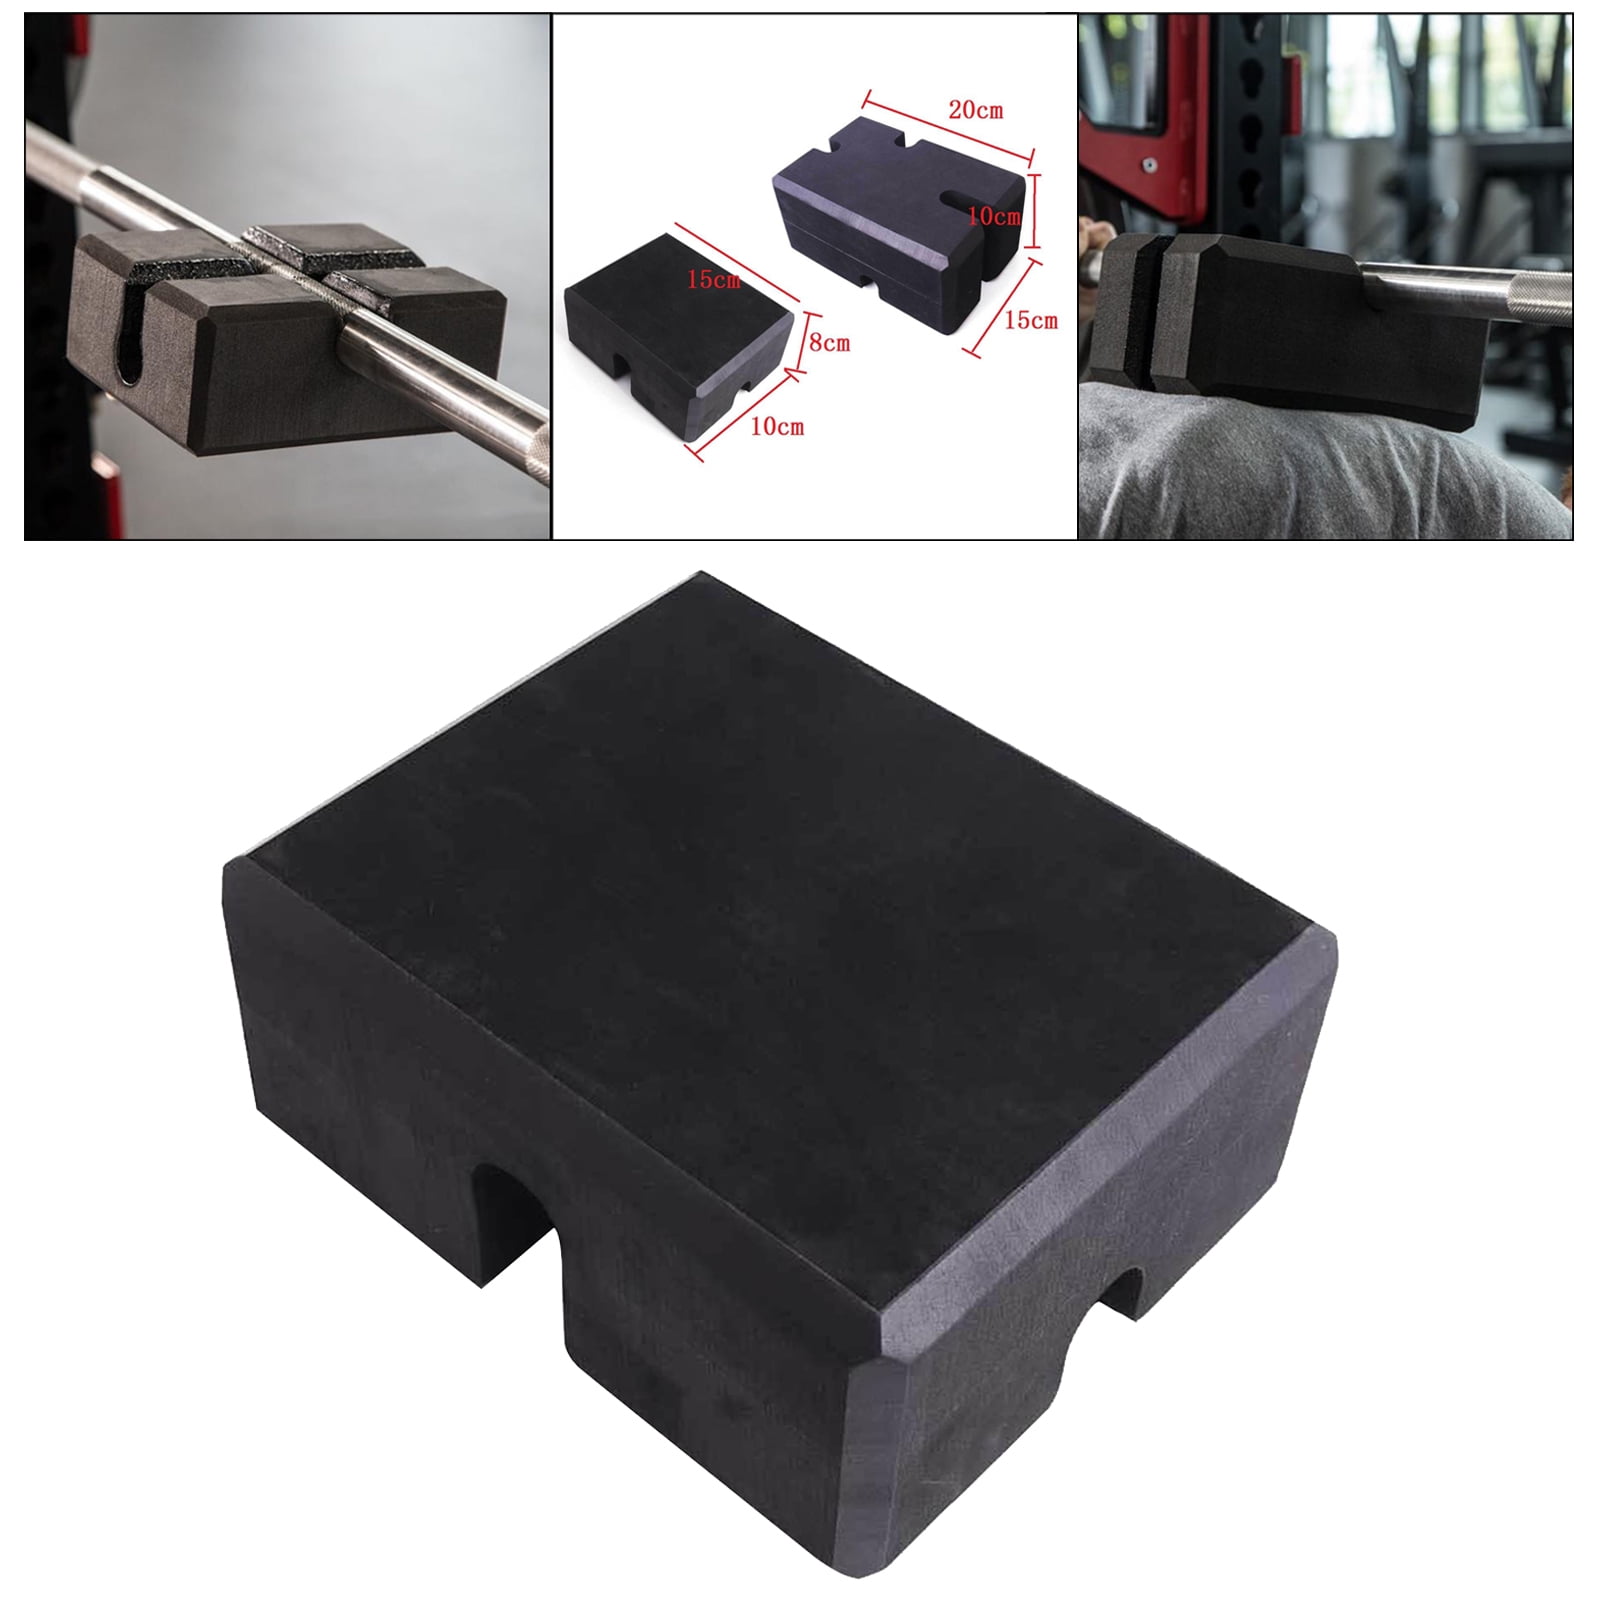 Dumbbell Storage Stand Bench Press Blocks Boards Bench Rest Foam Shooters Block 